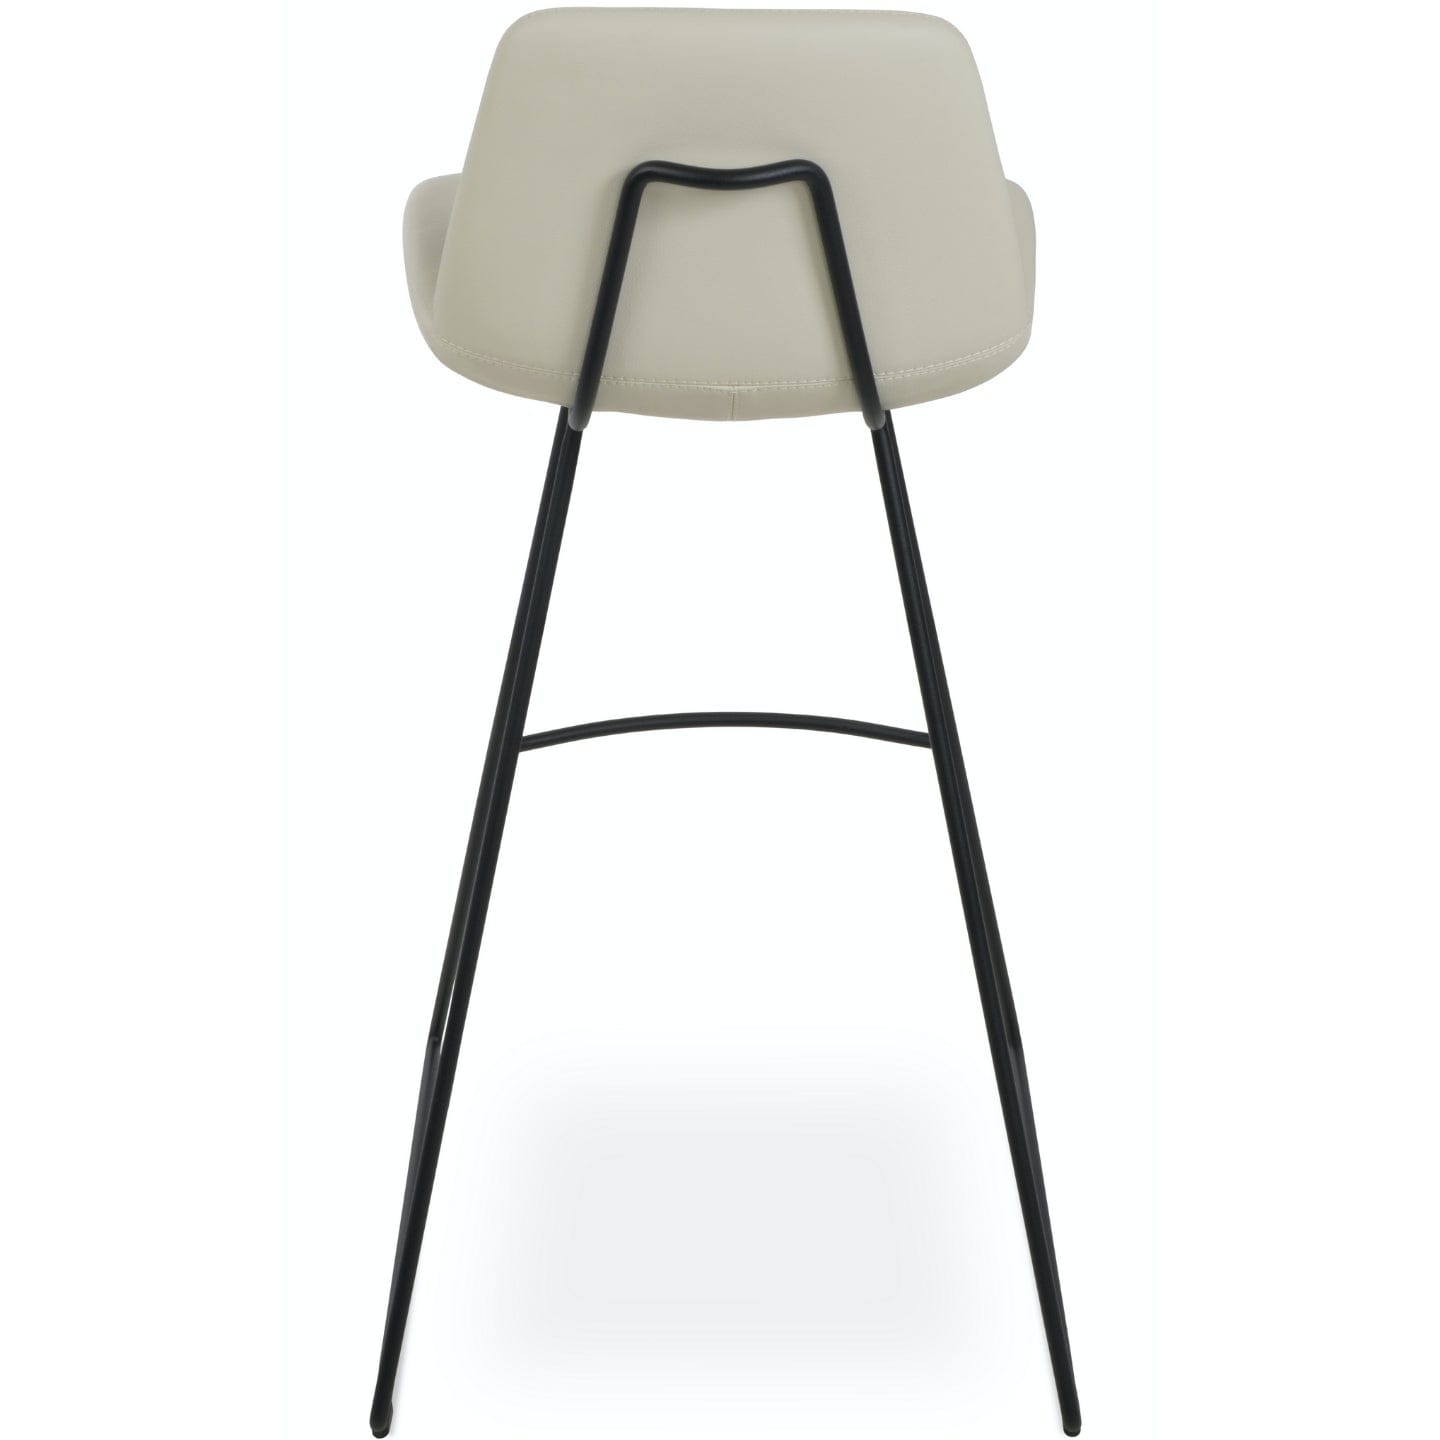 Soho Concept pera-wire-handle-back-black-metal-wire-base-faux-leather-seat-kitchen-stool-in-cream